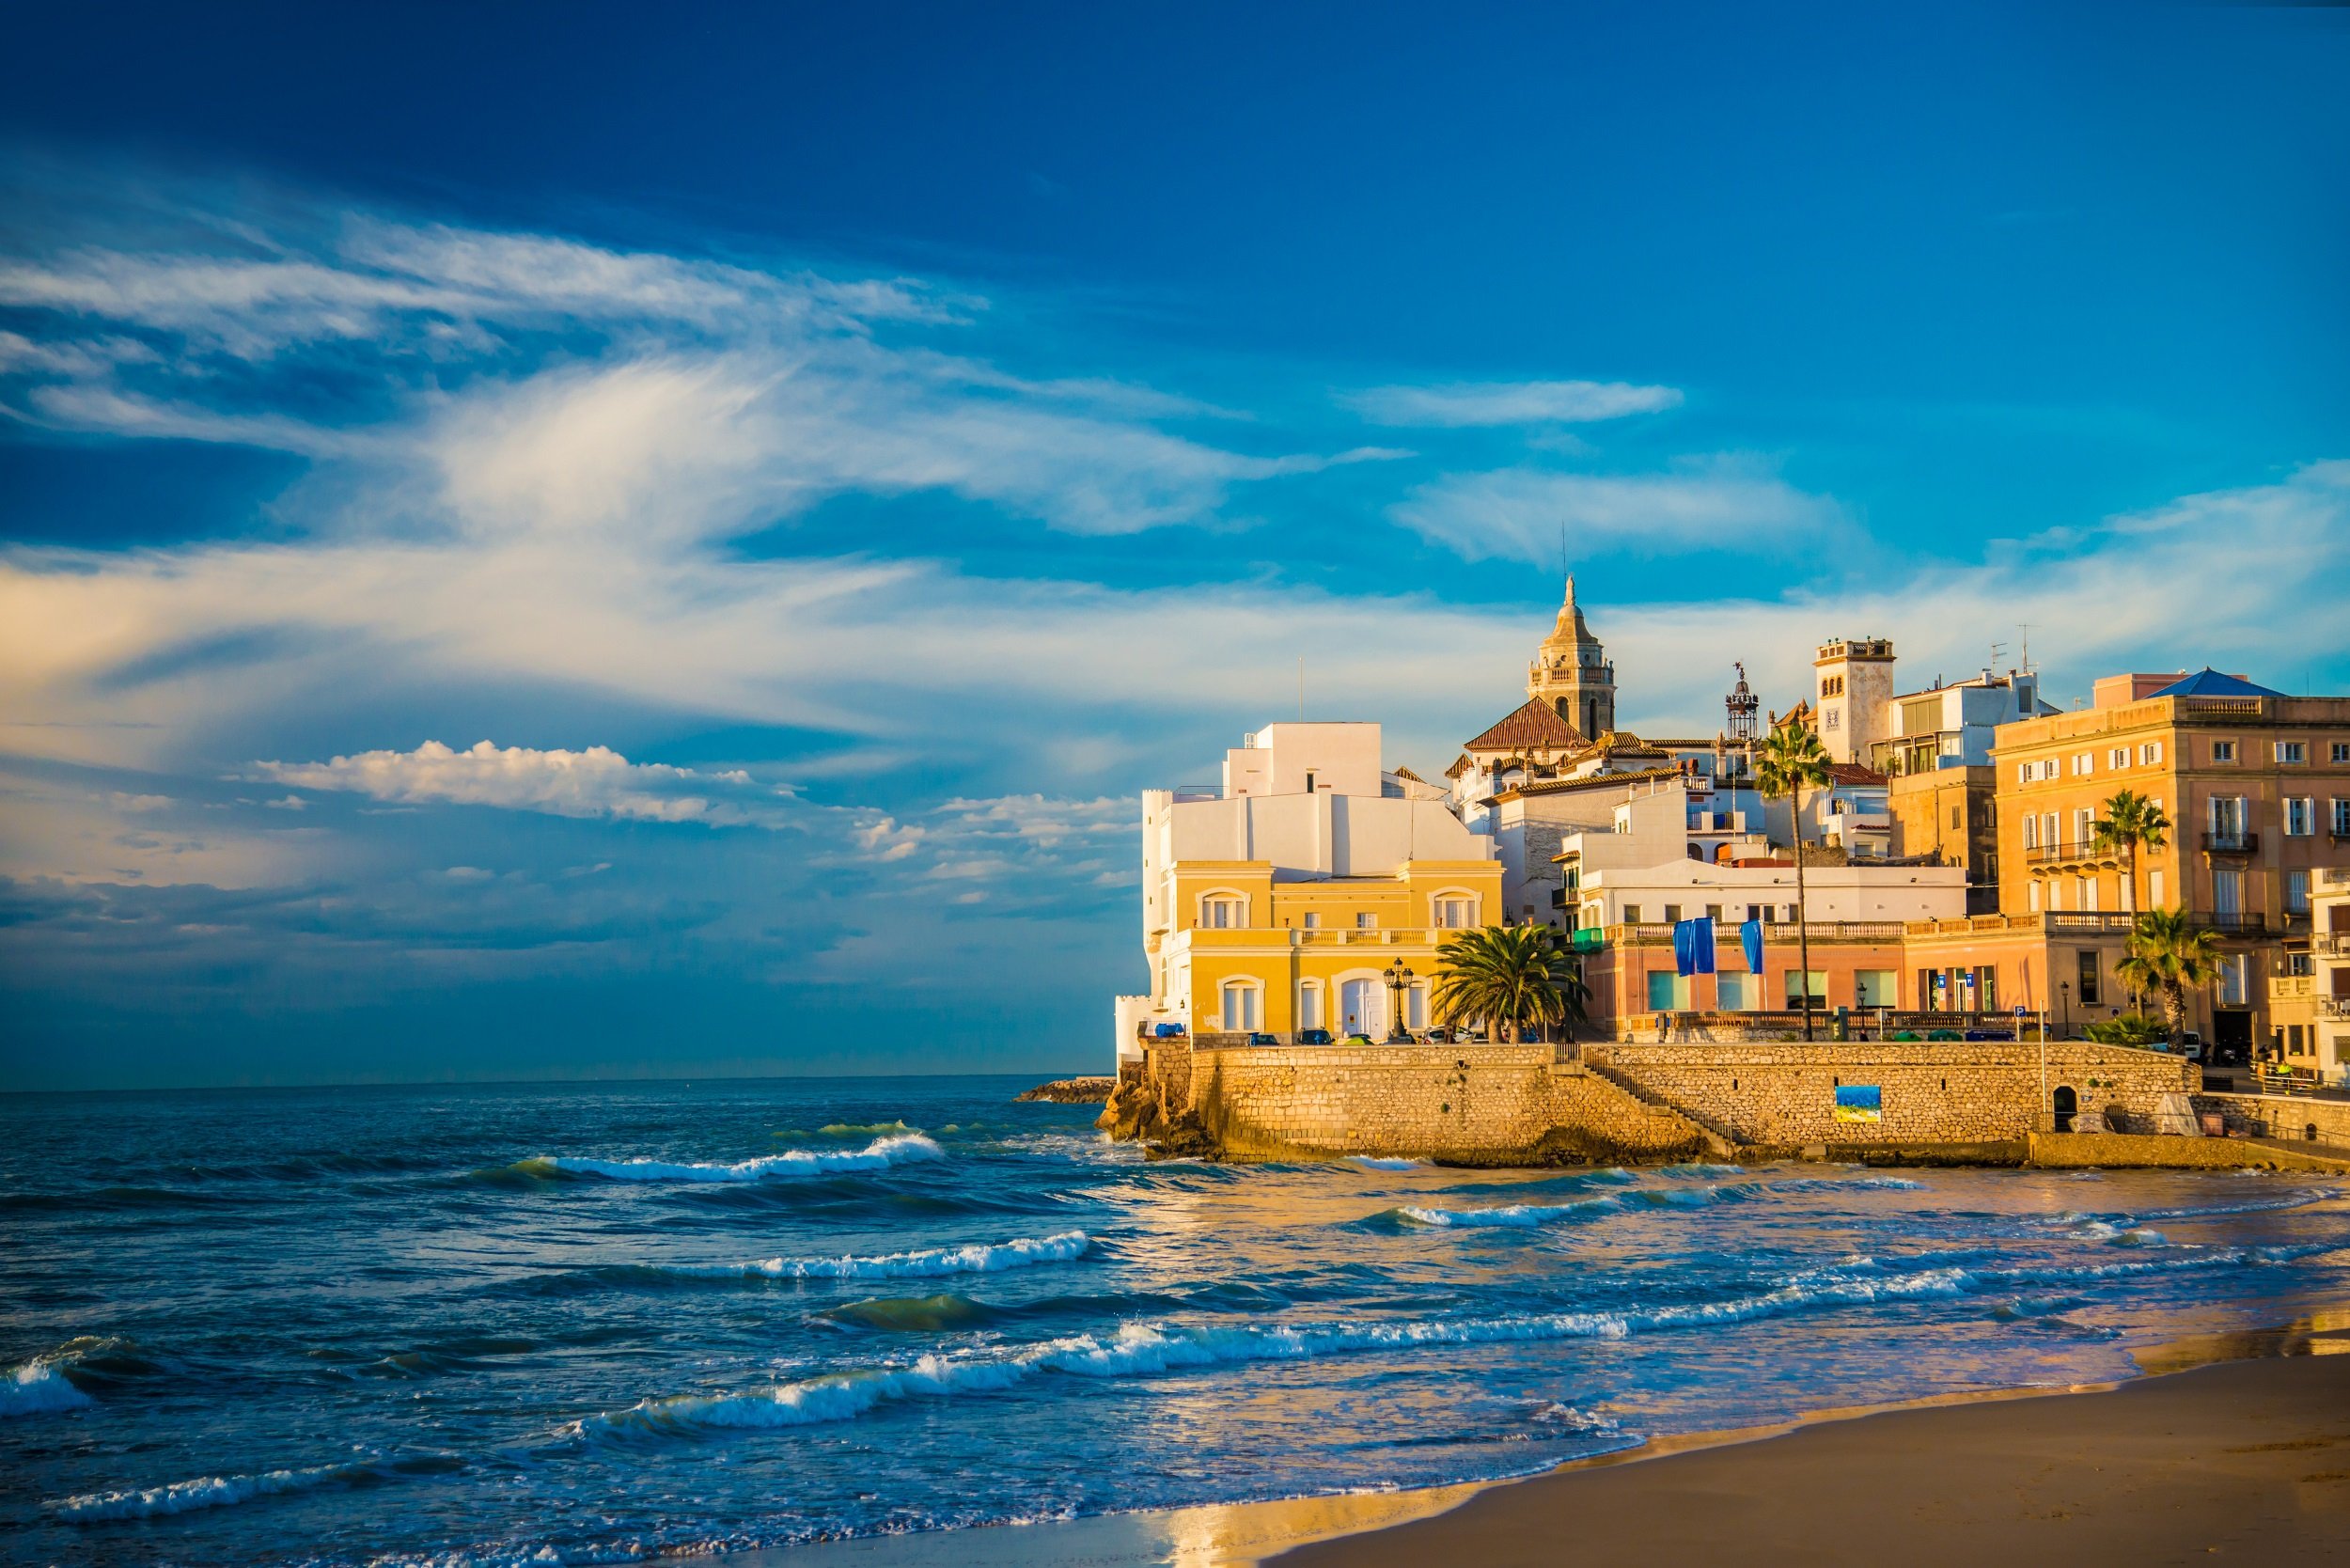 Enjoy The Sitges, Tapas & Wine Tasting Tour From Barcelona